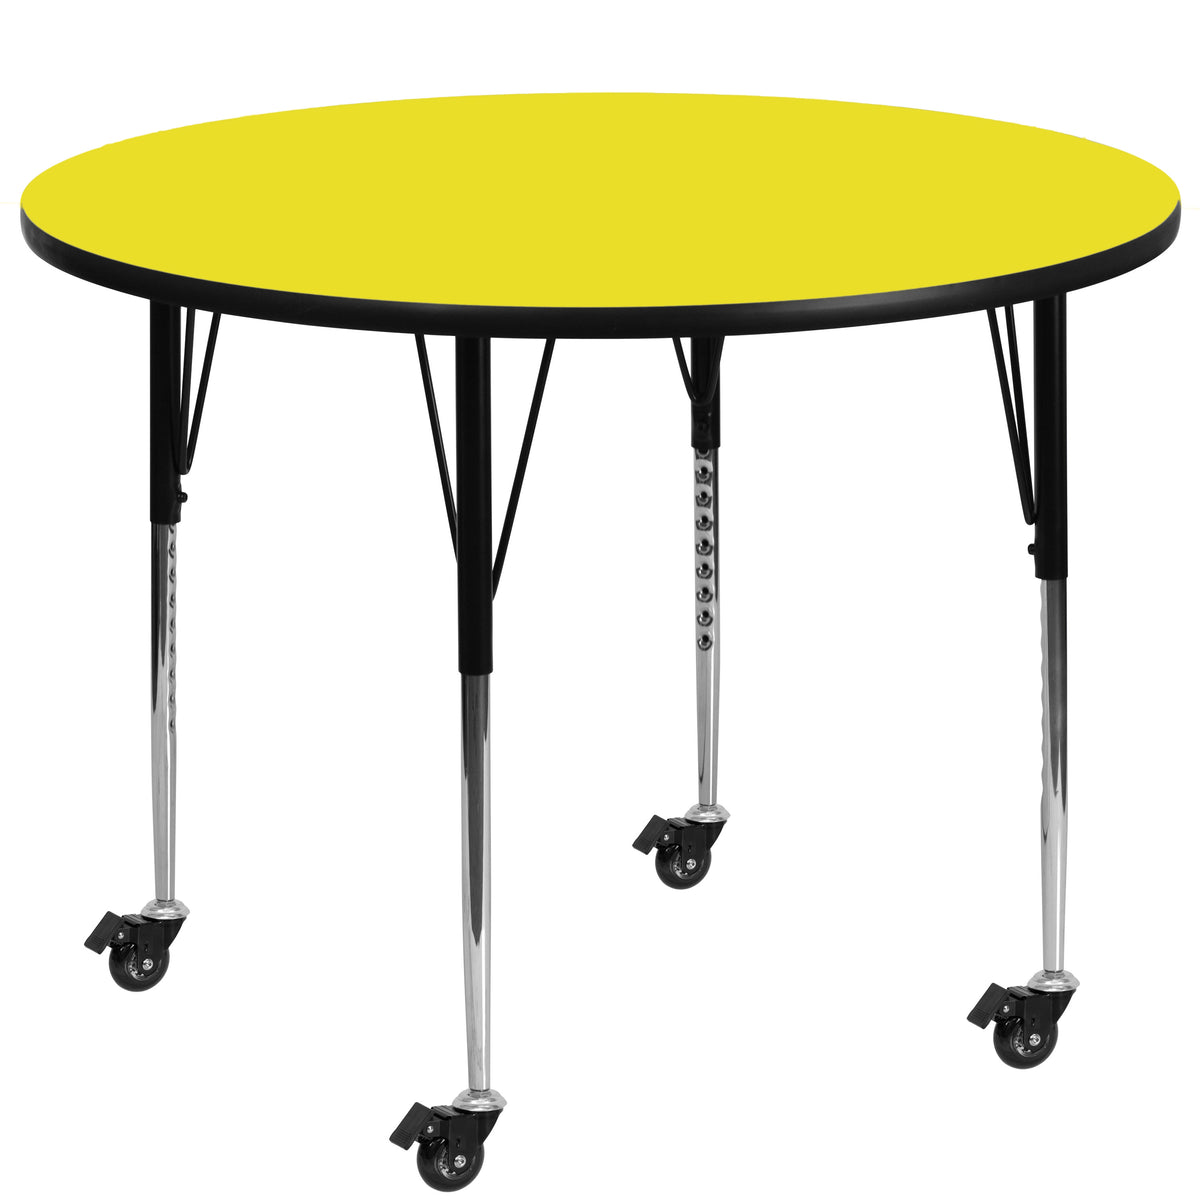 Yellow |#| Mobile 48inch Round Yellow HP Laminate Activity Table - Height Adjustable Legs